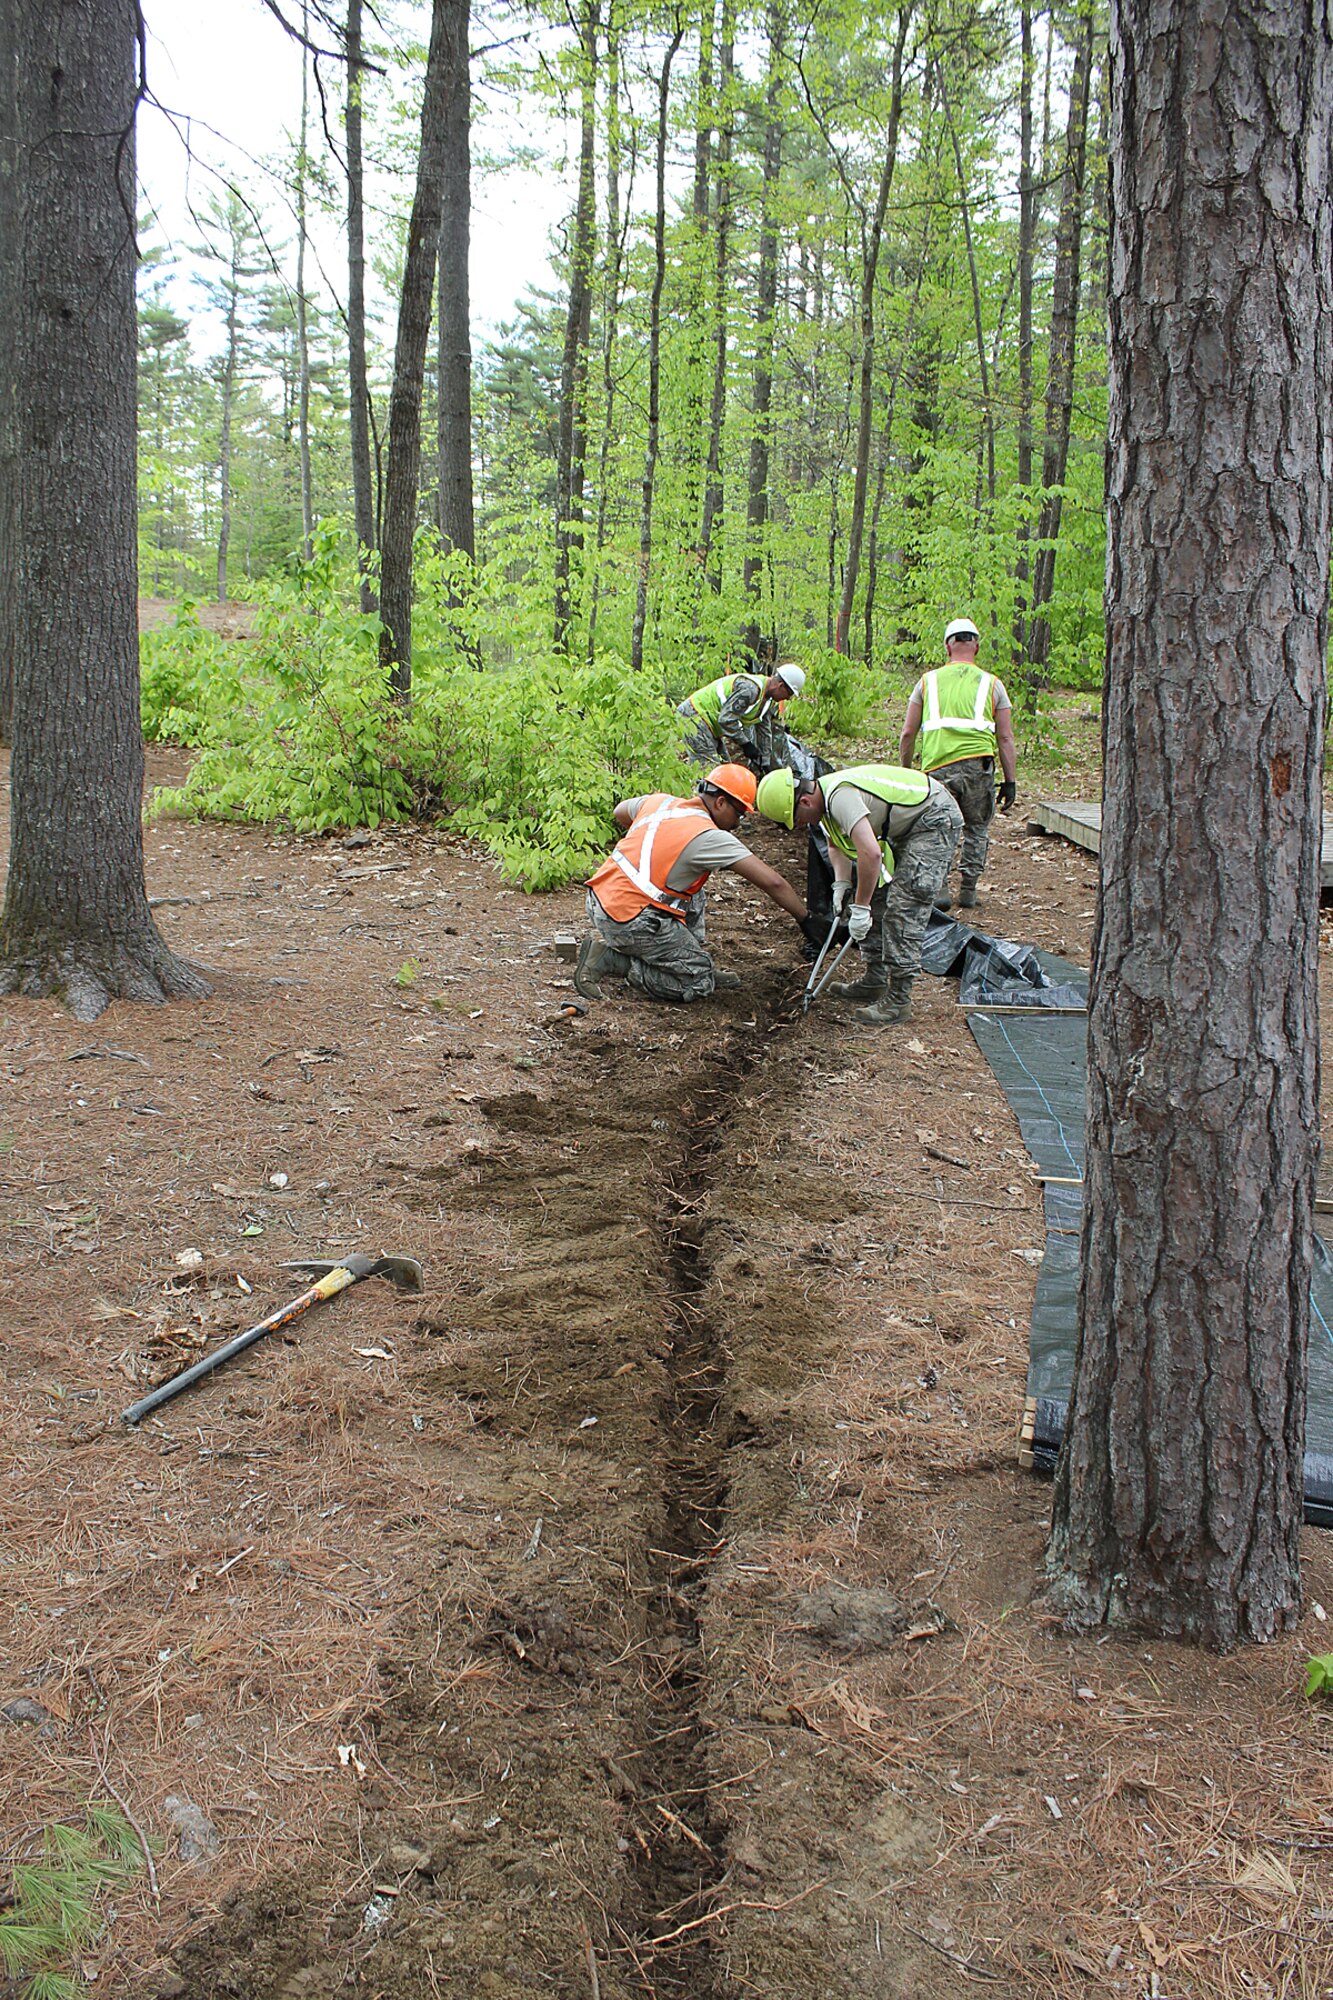 140521-Z-VA676-053 -- Michigan Air National Guard Airmen construct an erosion control fence at Camp Hinds Boy Scout Camp, Raymond, Maine, May 21, 2014. The Airmen are members of the 127th Civil Engineer Squadron, based at Selfridge Air National Guard Base, Mich. The Airmen, along with Marine Corps Reservists and Army Reservists, are working on various construction projects at the camp during an Innovative Readiness Training mission, which allows military personnel to get training in various tasks and a community organization, in this case the Boy Scouts, to benefit from the work. (U.S. Air National Guard photo by Technical Sgt. Dan Heaton)